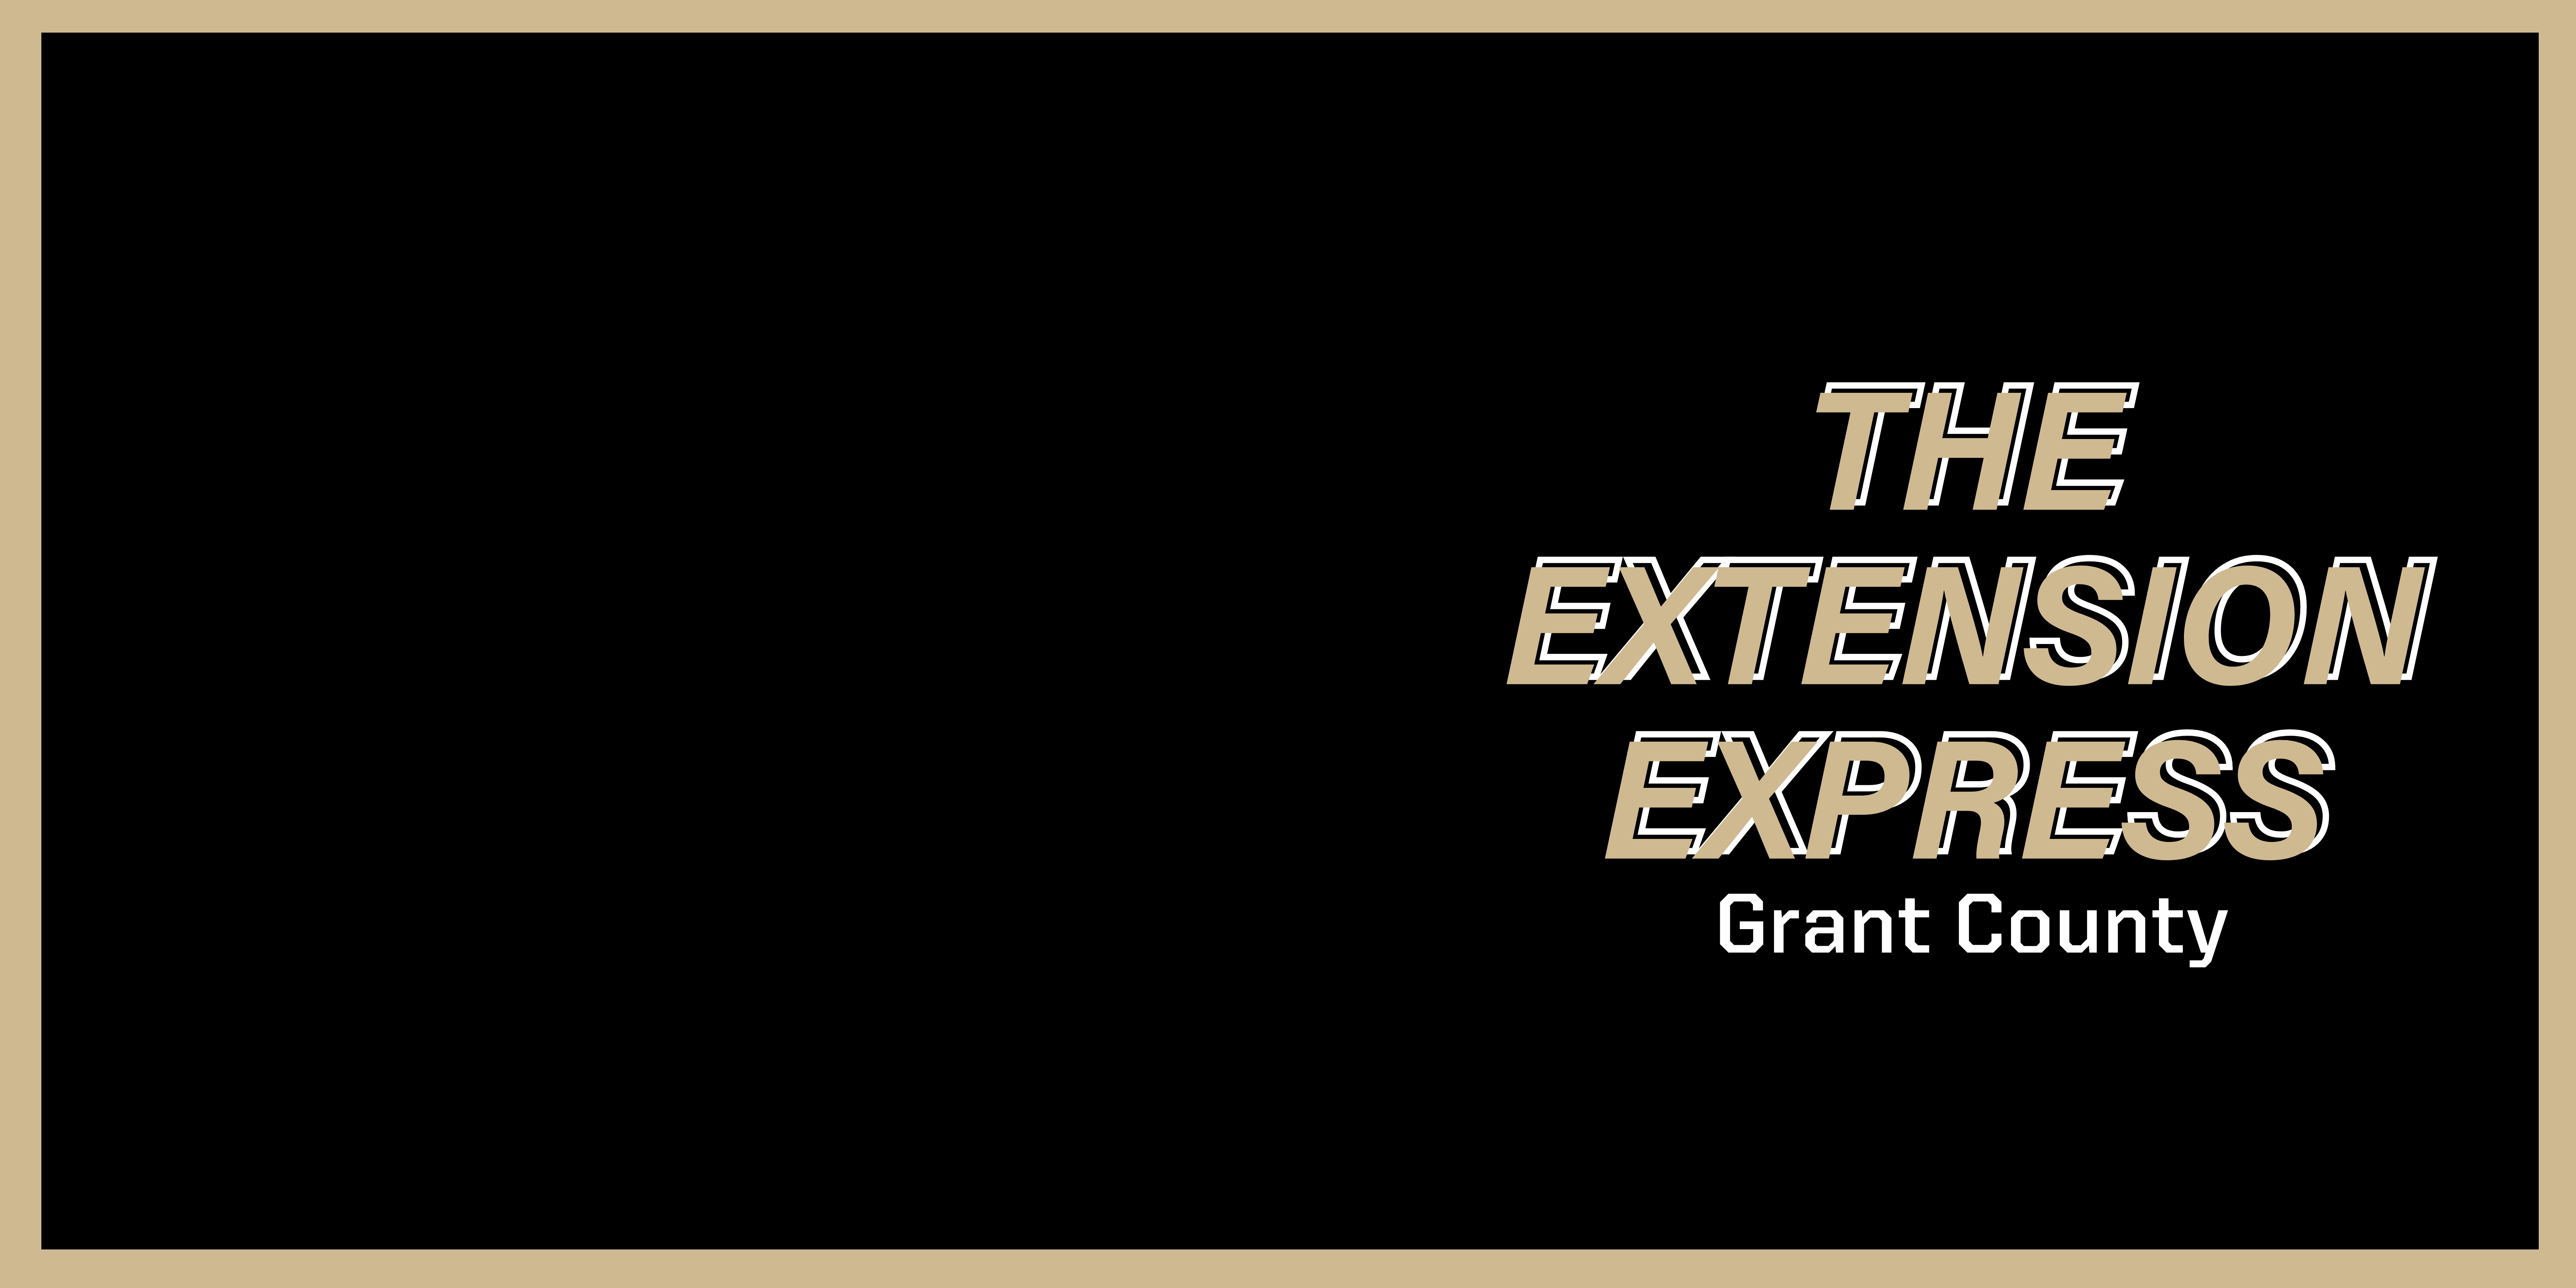 Grant County Extension Express